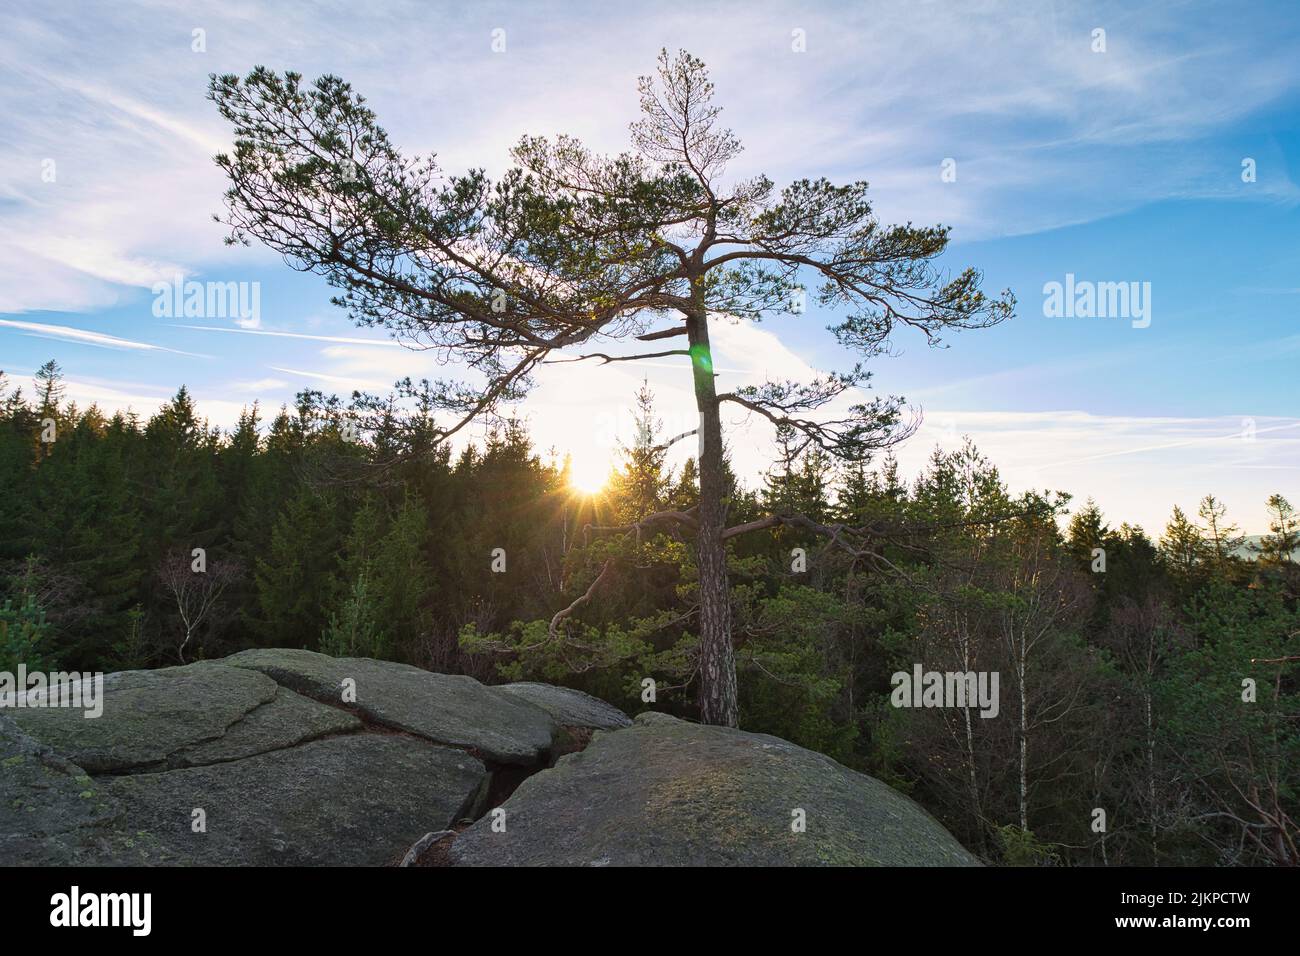 A single pine tree grows on a rock and there is a dense forest below Stock Photo